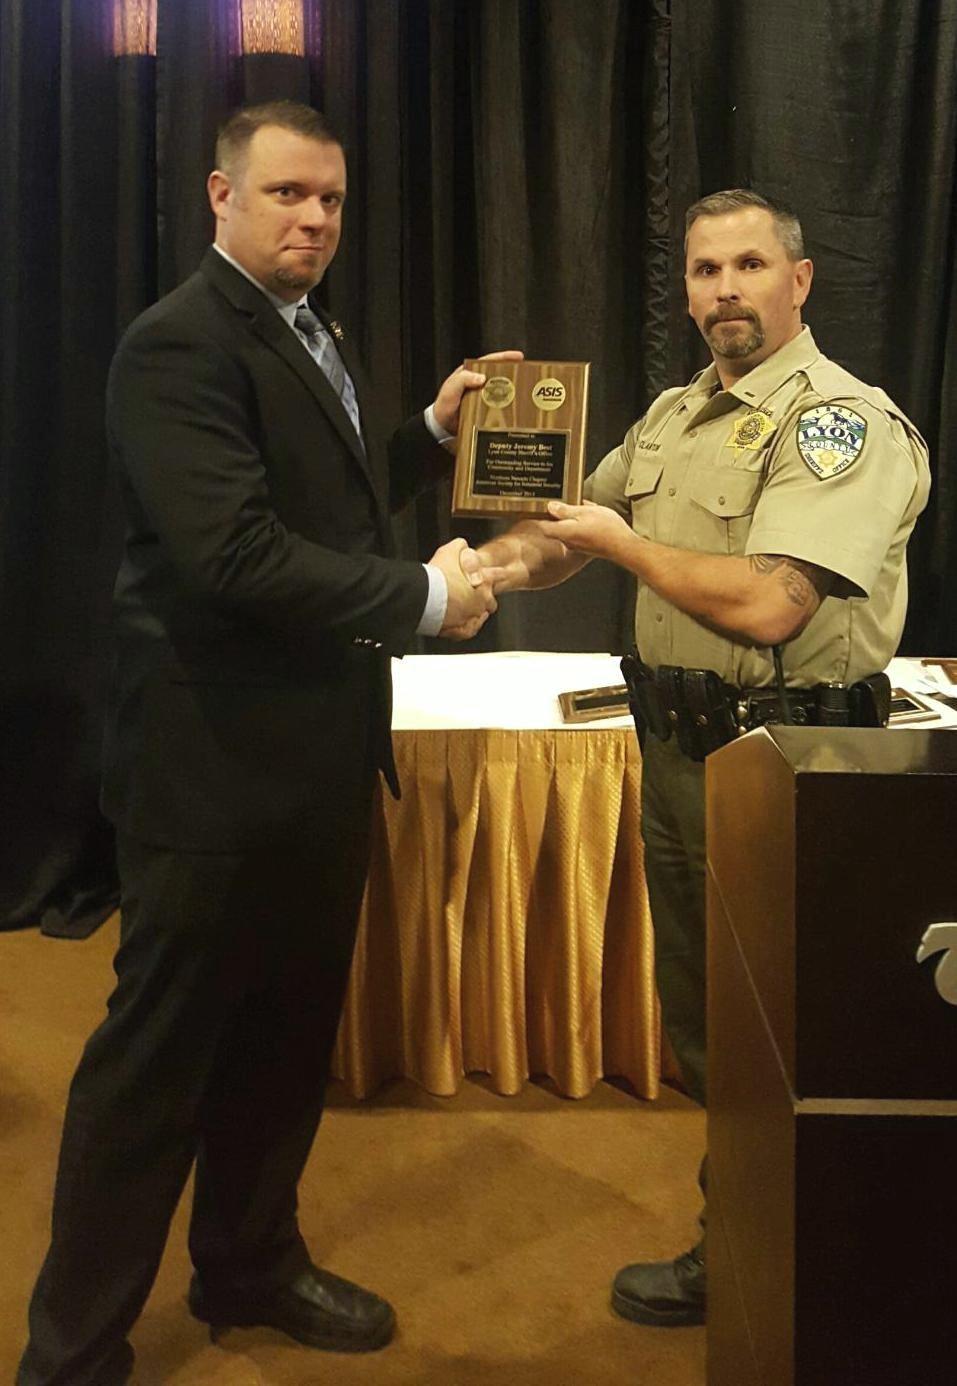 Community Service Award Awarded by the Sheriff to an individual or civilian who designs, implements and/or participates in community or school projects, neighborhood watches, town meetings, cultural